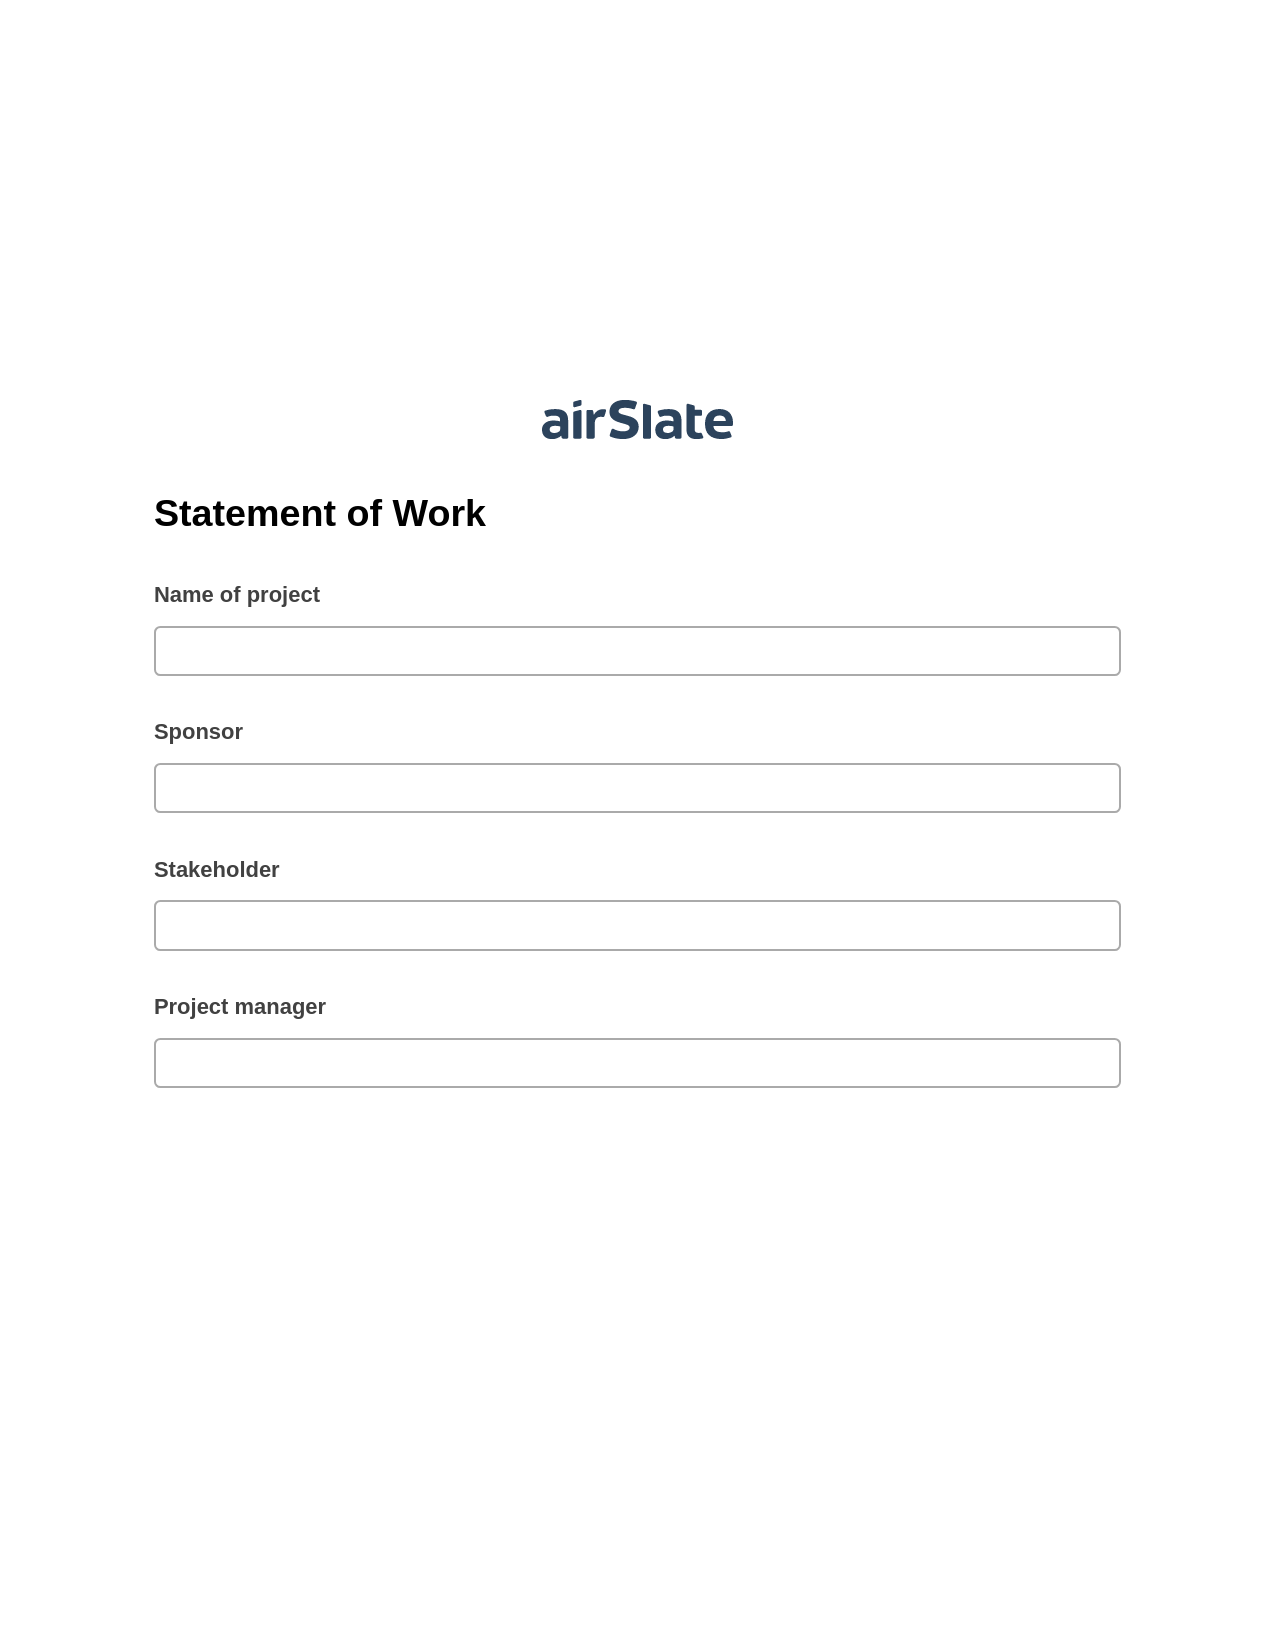 Statement of Work Pre-fill from another Slate Bot, Google Cloud Print Bot, Export to MySQL Bot